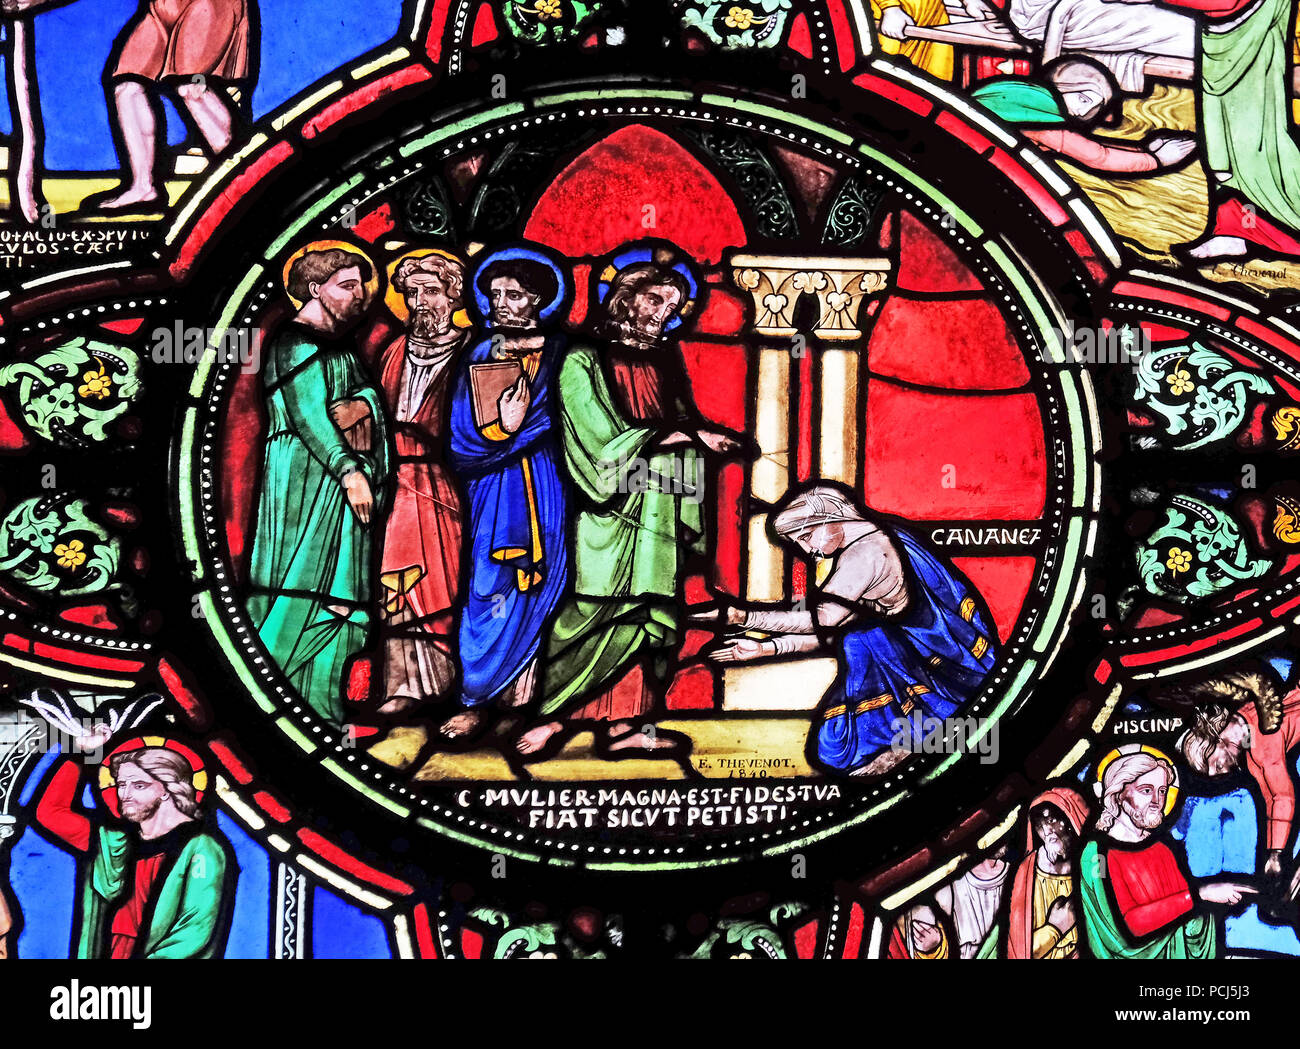 Jesus and the Canaanite woman, stained glass window from Saint Germain-l'Auxerrois church in Paris, France Stock Photo